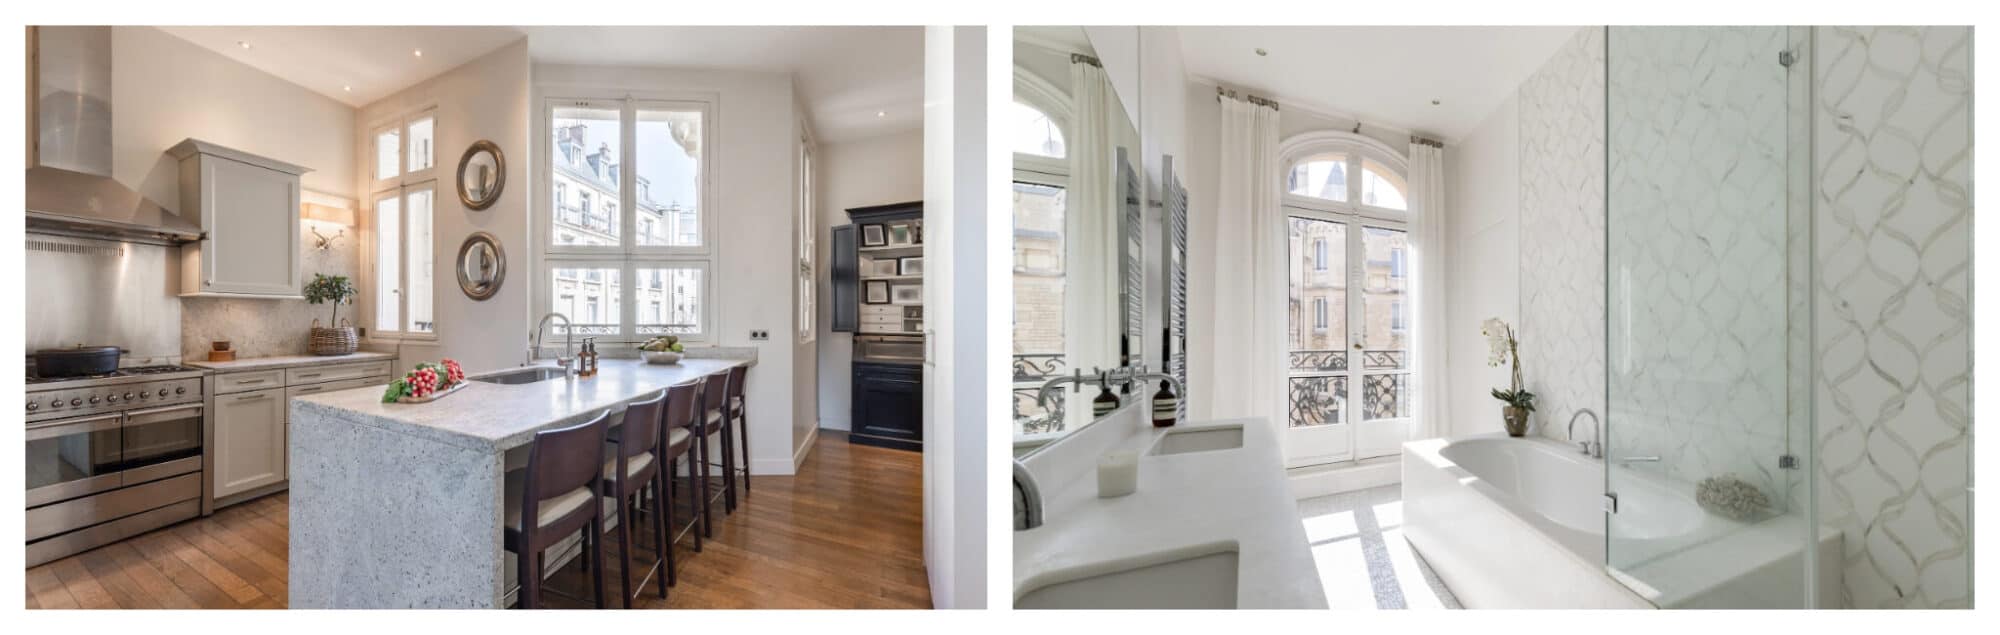 Left: a small kitchen in a Paris apartment with a stone island, wooden floors and 3 large windows overlooking classic Parisian buildings; Right: a newly remodeled bathroom with a white marble double sink, white bathtub, white and grey patterned wallpaper, and large window with white curtains looking onto the historic buildings of the Marais.